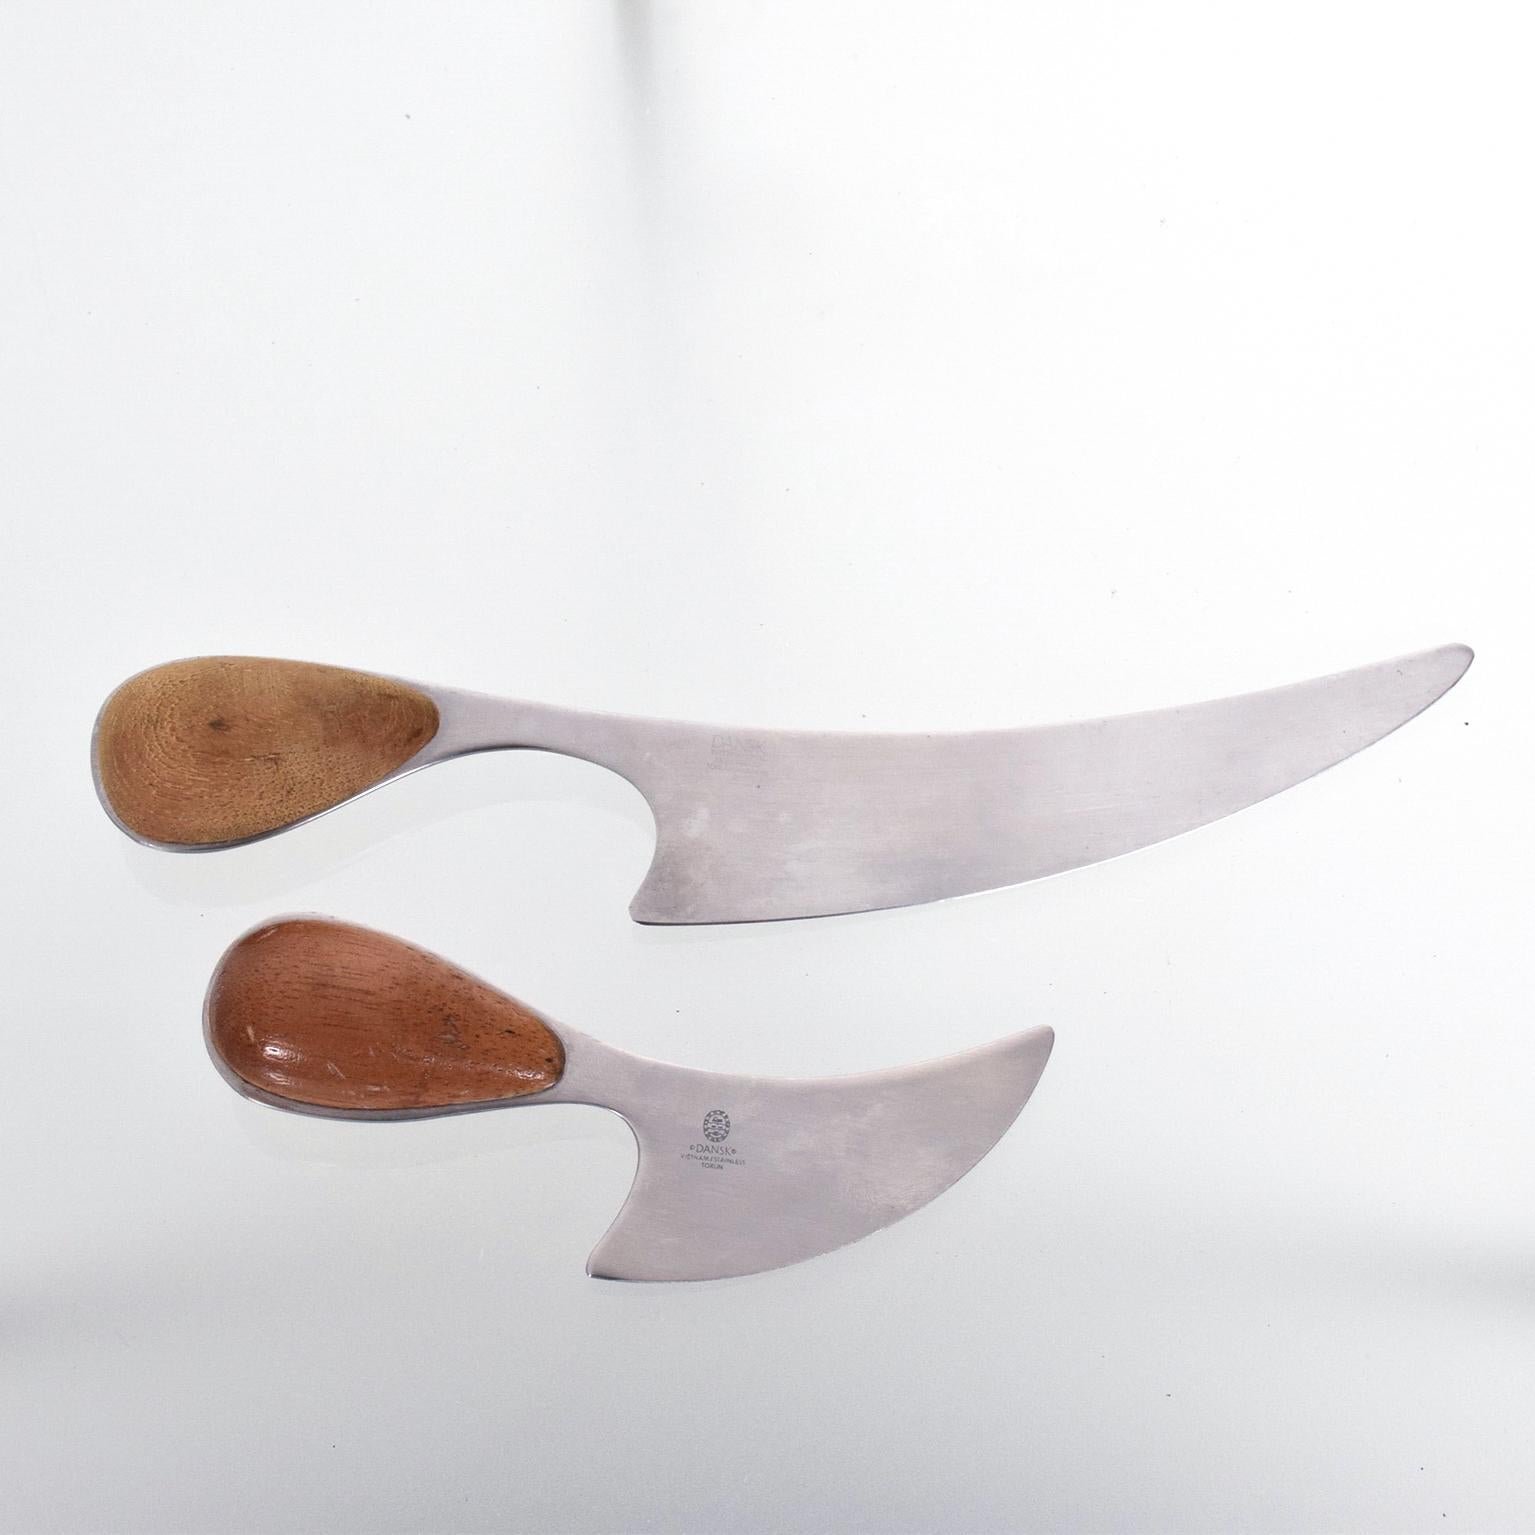 Just for you: Mid-Century Modern Denmark large cheese server knife by Dansk designs in stainless steel and teak, circa 1960s.
Sculpted Cheese Knife designed by master jeweler and silversmith Vivianna Torun for Dansk.
Measures: Height 9.5 in.